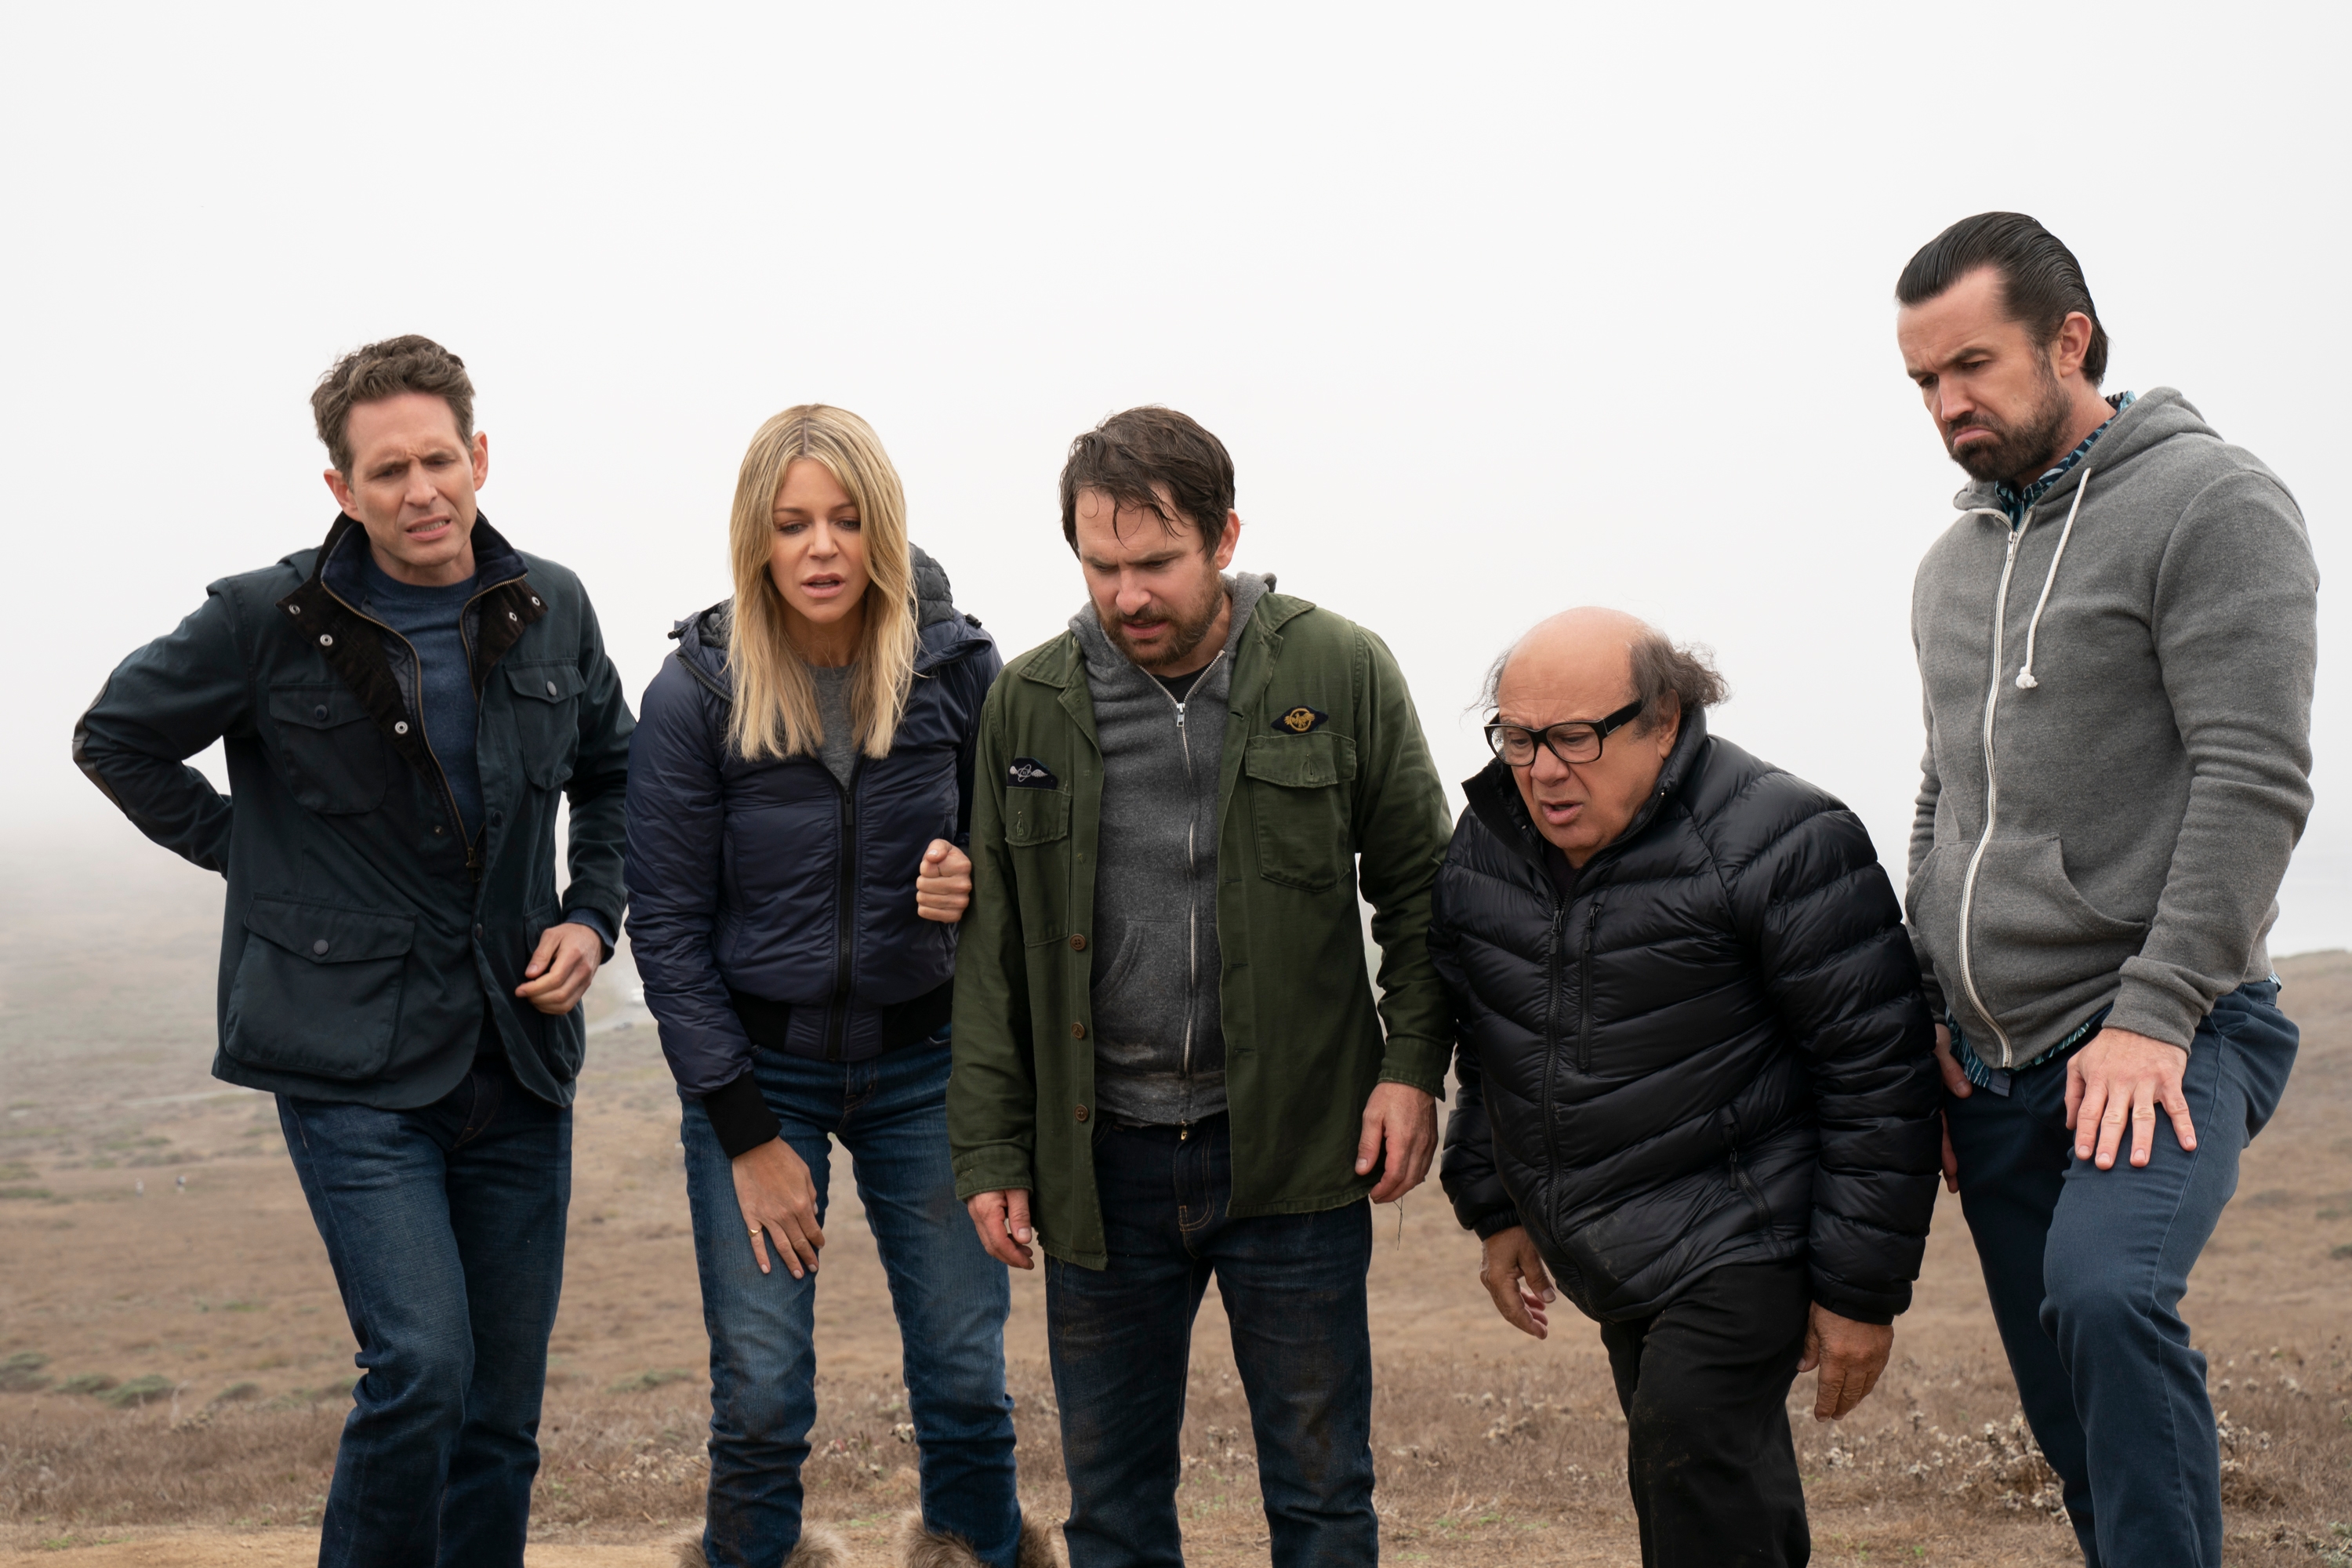 It’s Always Sunny In Philadelphia’s 15th season ends with a corpse, naturally